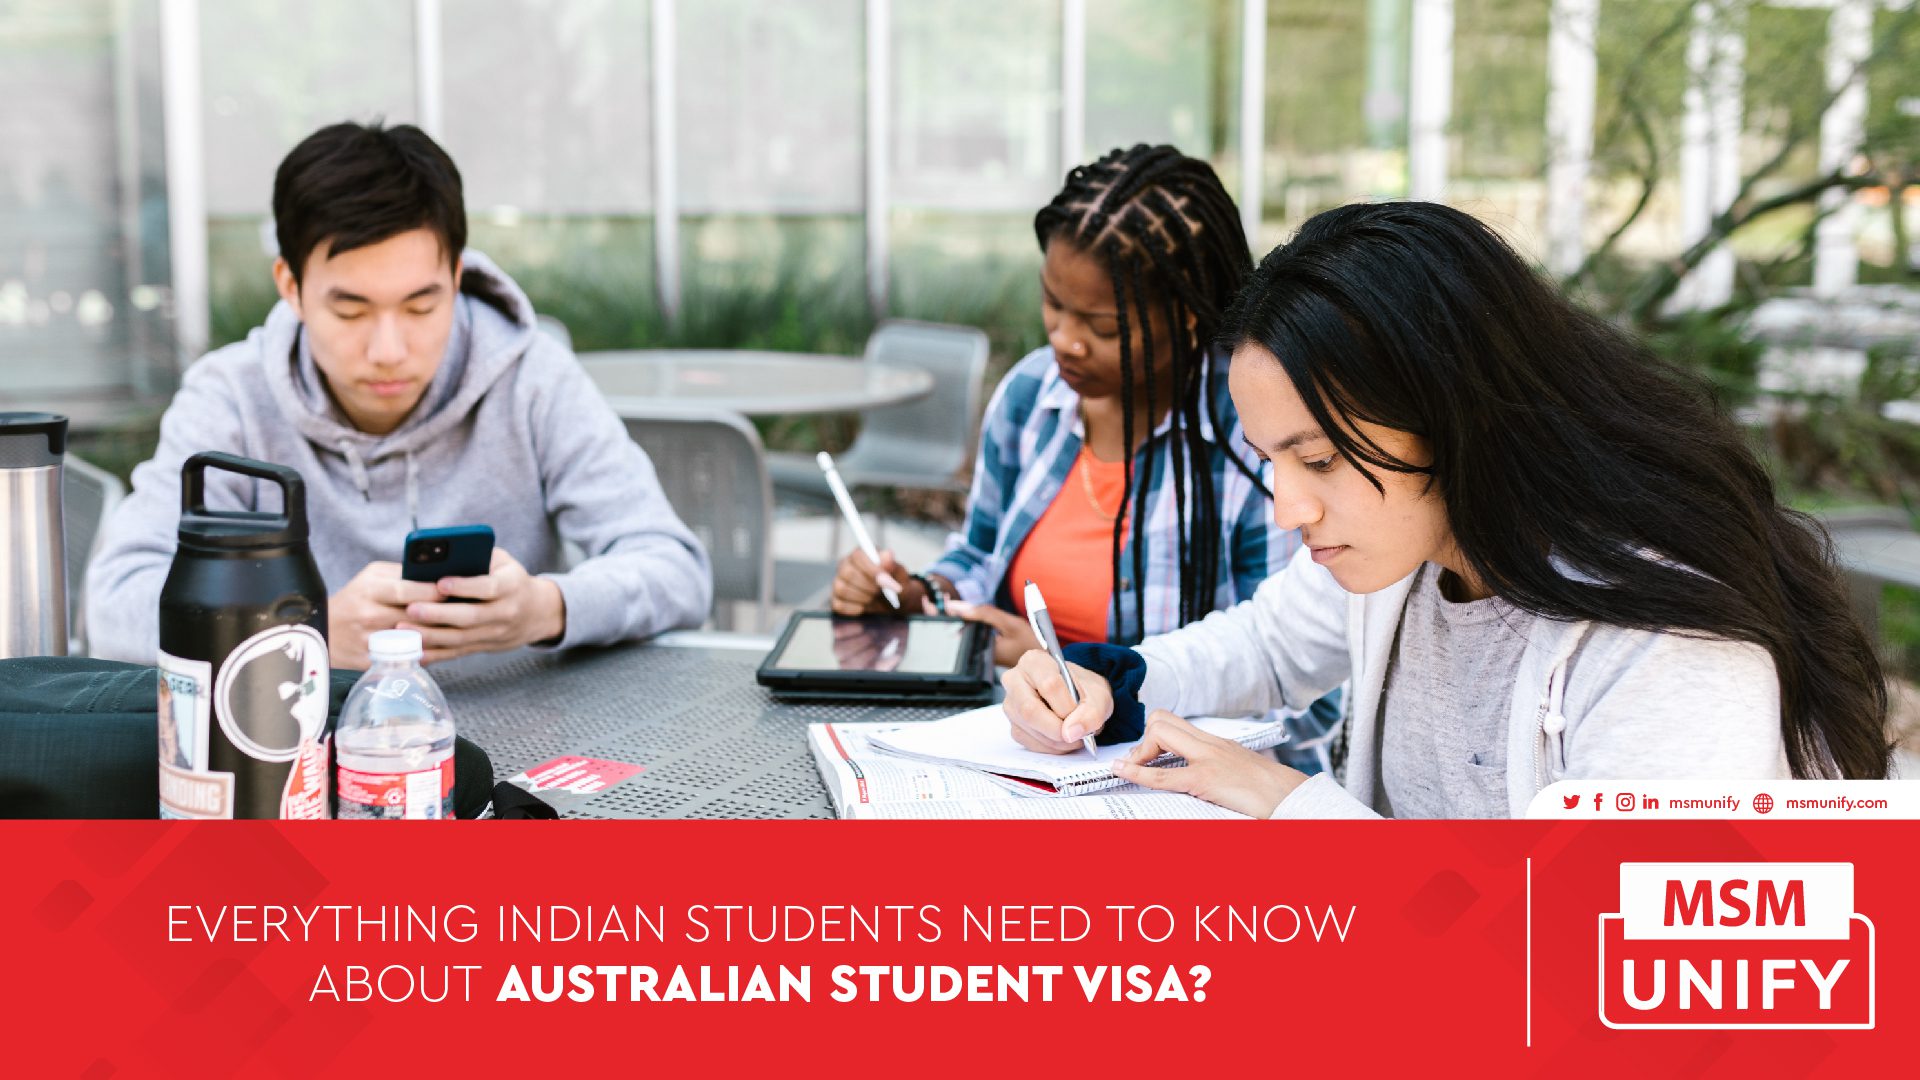 120722 MSM Unify  Everything Indian students need to know about Australian student visa 01